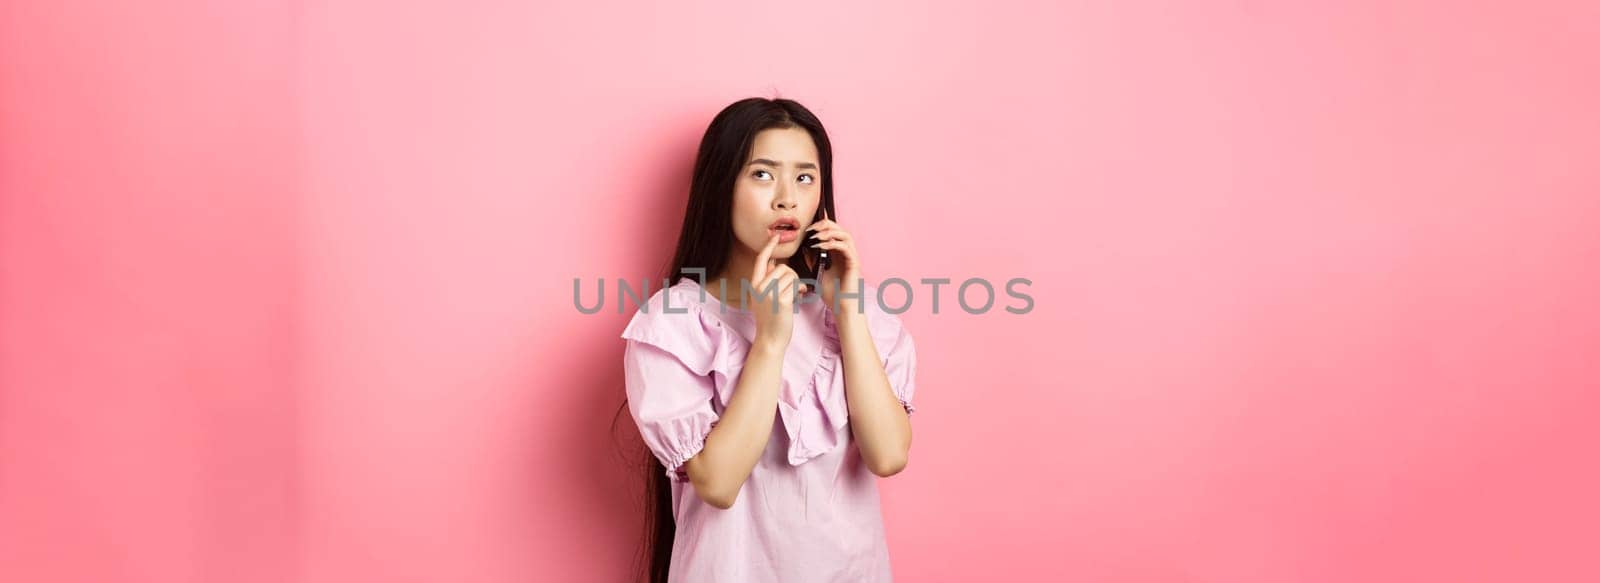 Thoughtful asian woman talking on mobile phone and thinking, touching lip and look up pensive, standing against pink background.